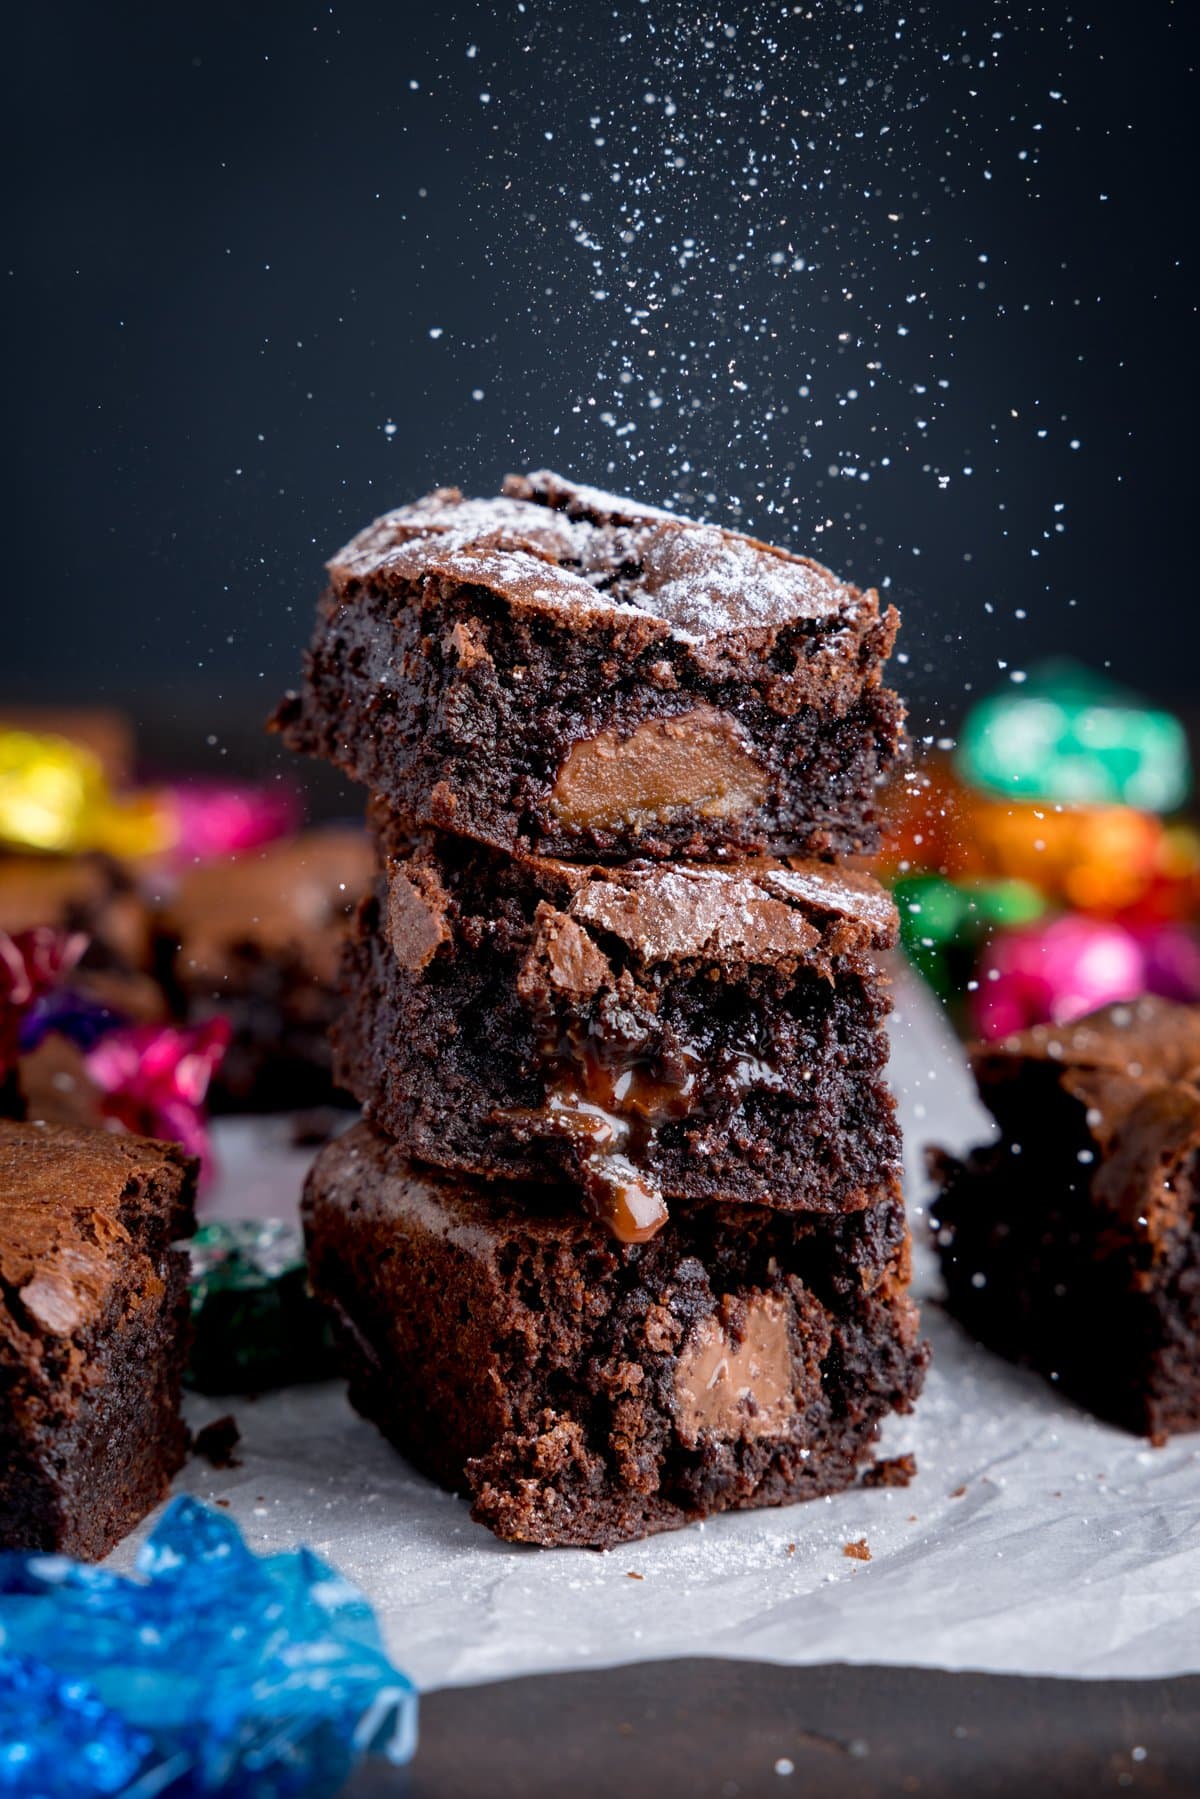 A pile of chocolate Brownies on some baking parchment with icing sugar being dusted on with some empty chocolate wrappers in the background.